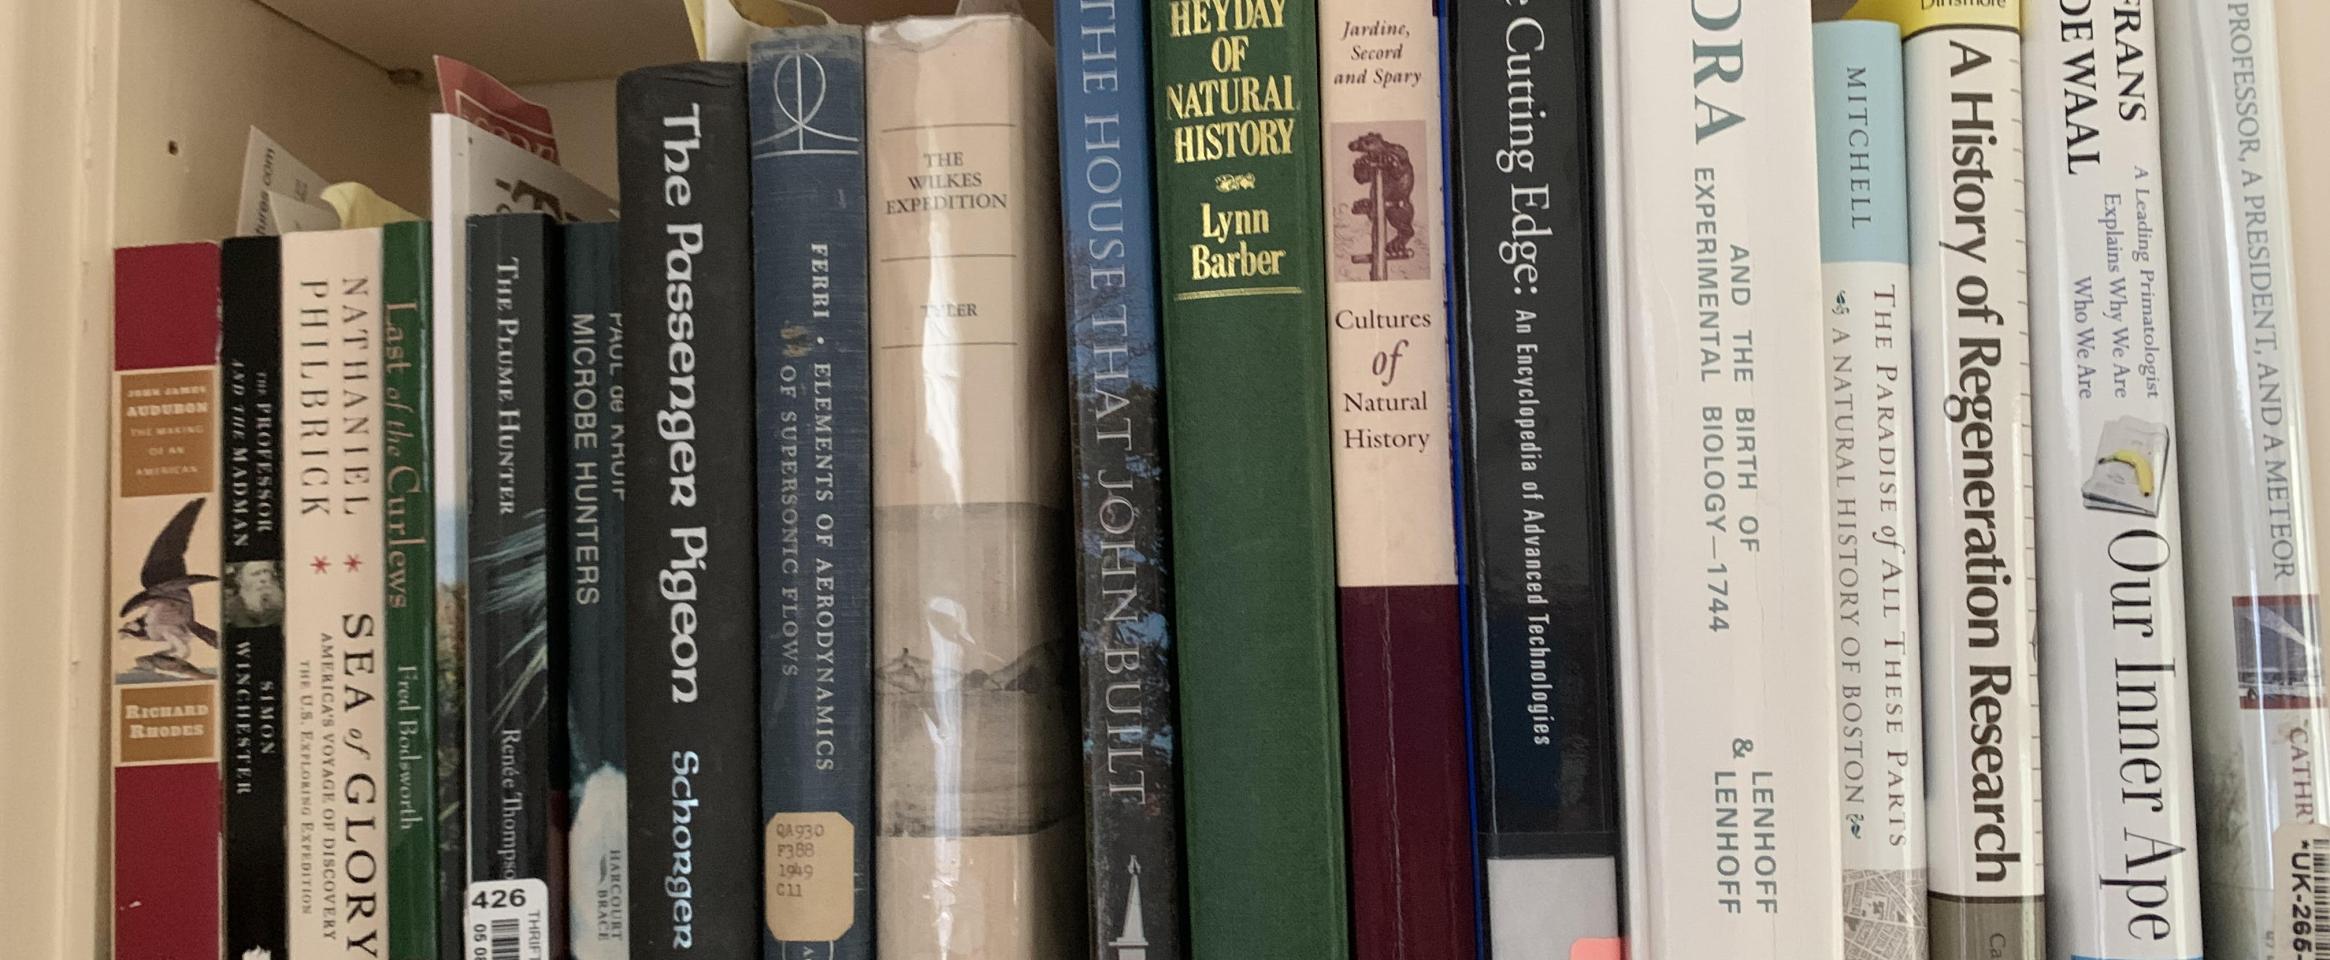 Rectangular photo of Ann Parson’s office book shelf showing works on explorers’ travels, natural history, and the development of technologies. Photo credit: Ann Parson.